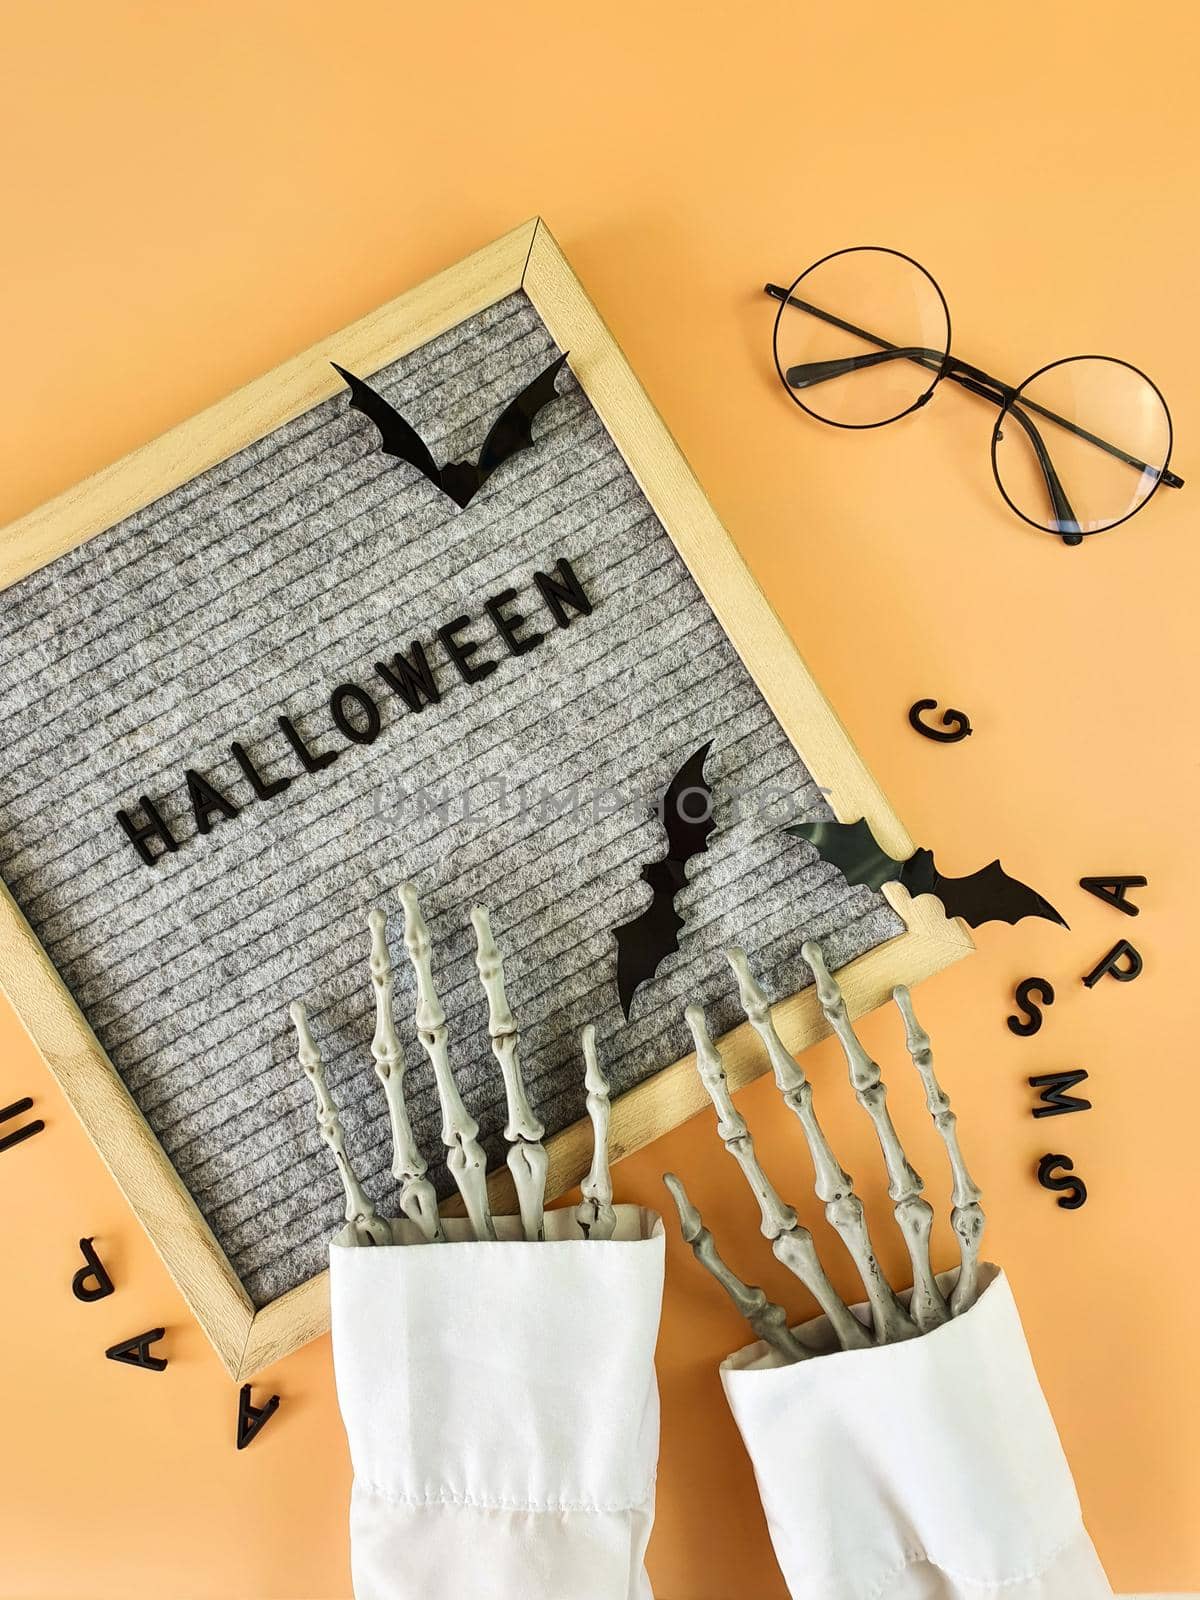 The skeleton's hand collects the word Halloween in a frame by Spirina